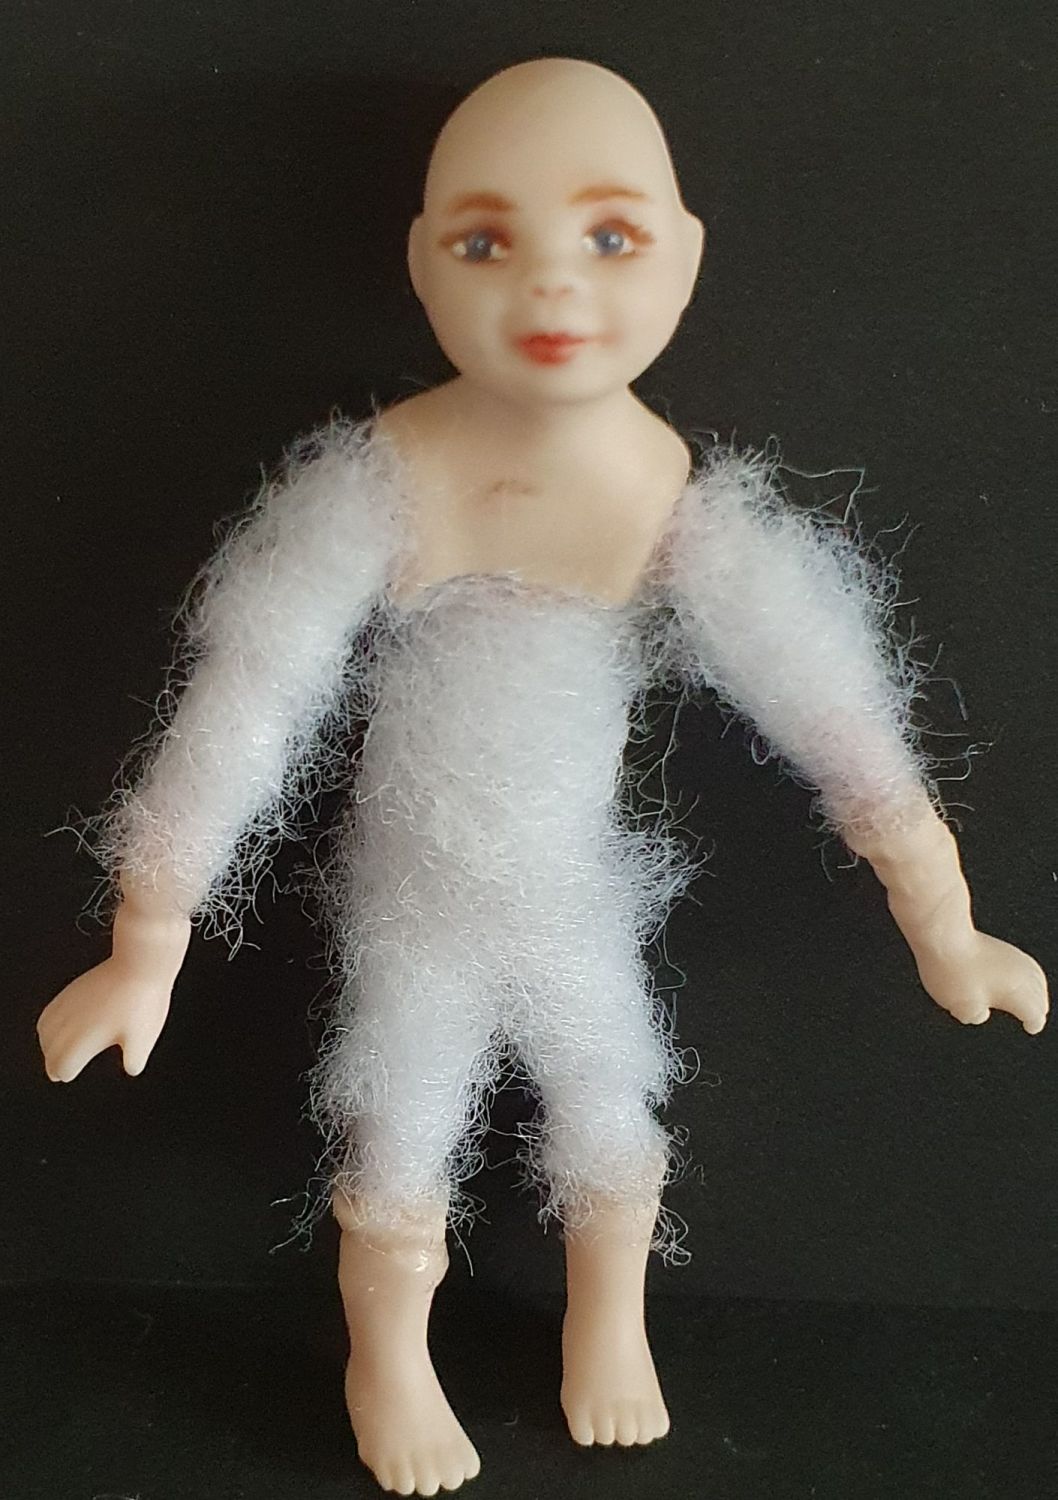 1/12th scale child doll